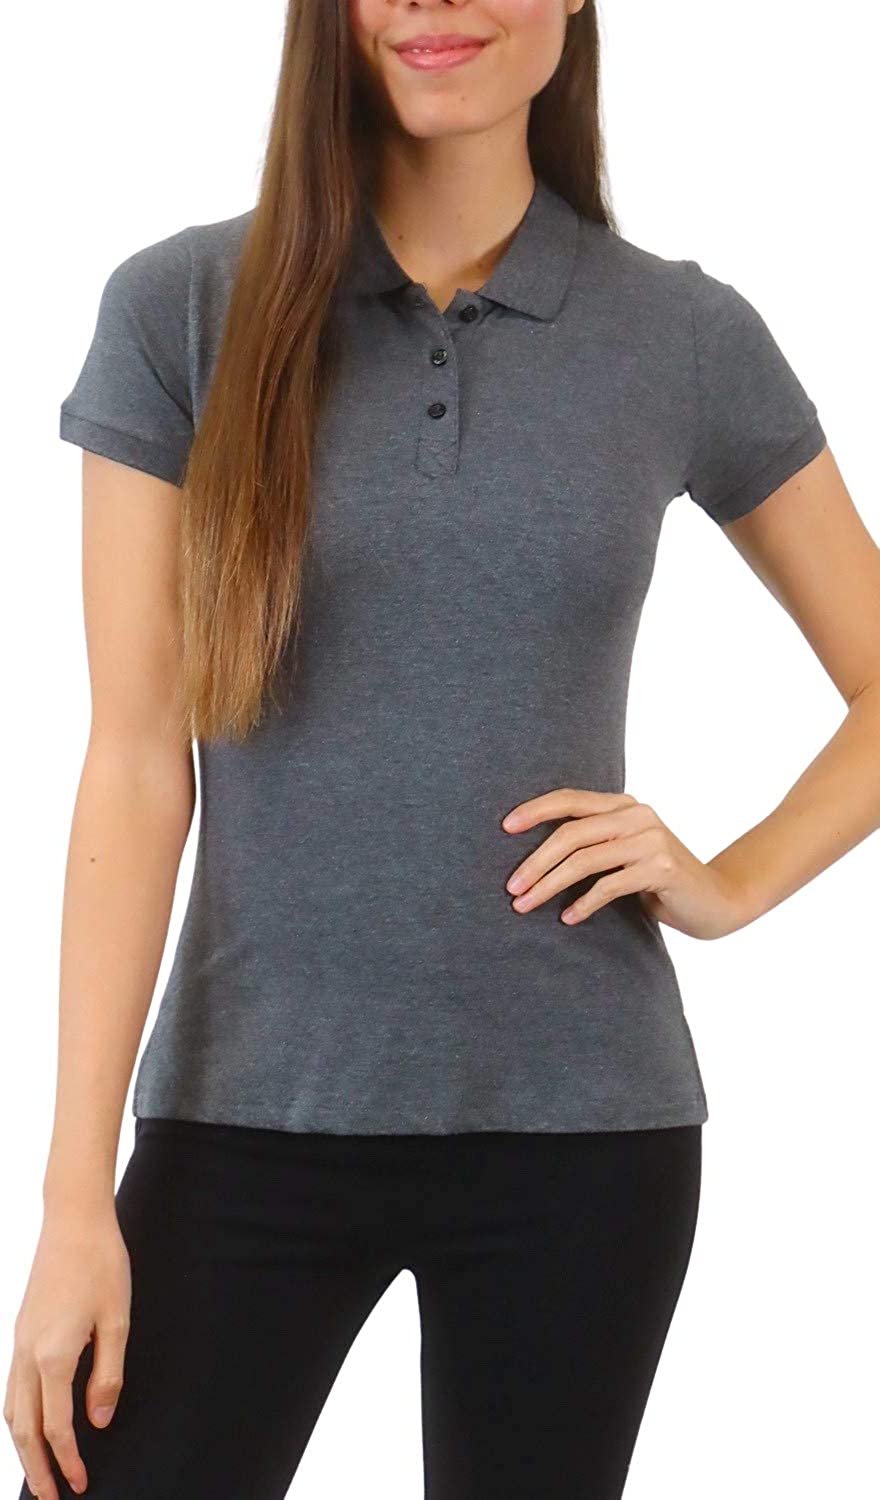 Pure Look Women’s Short Sleeve 5-Button Breathable Stretch Cotton Polo Shirt 